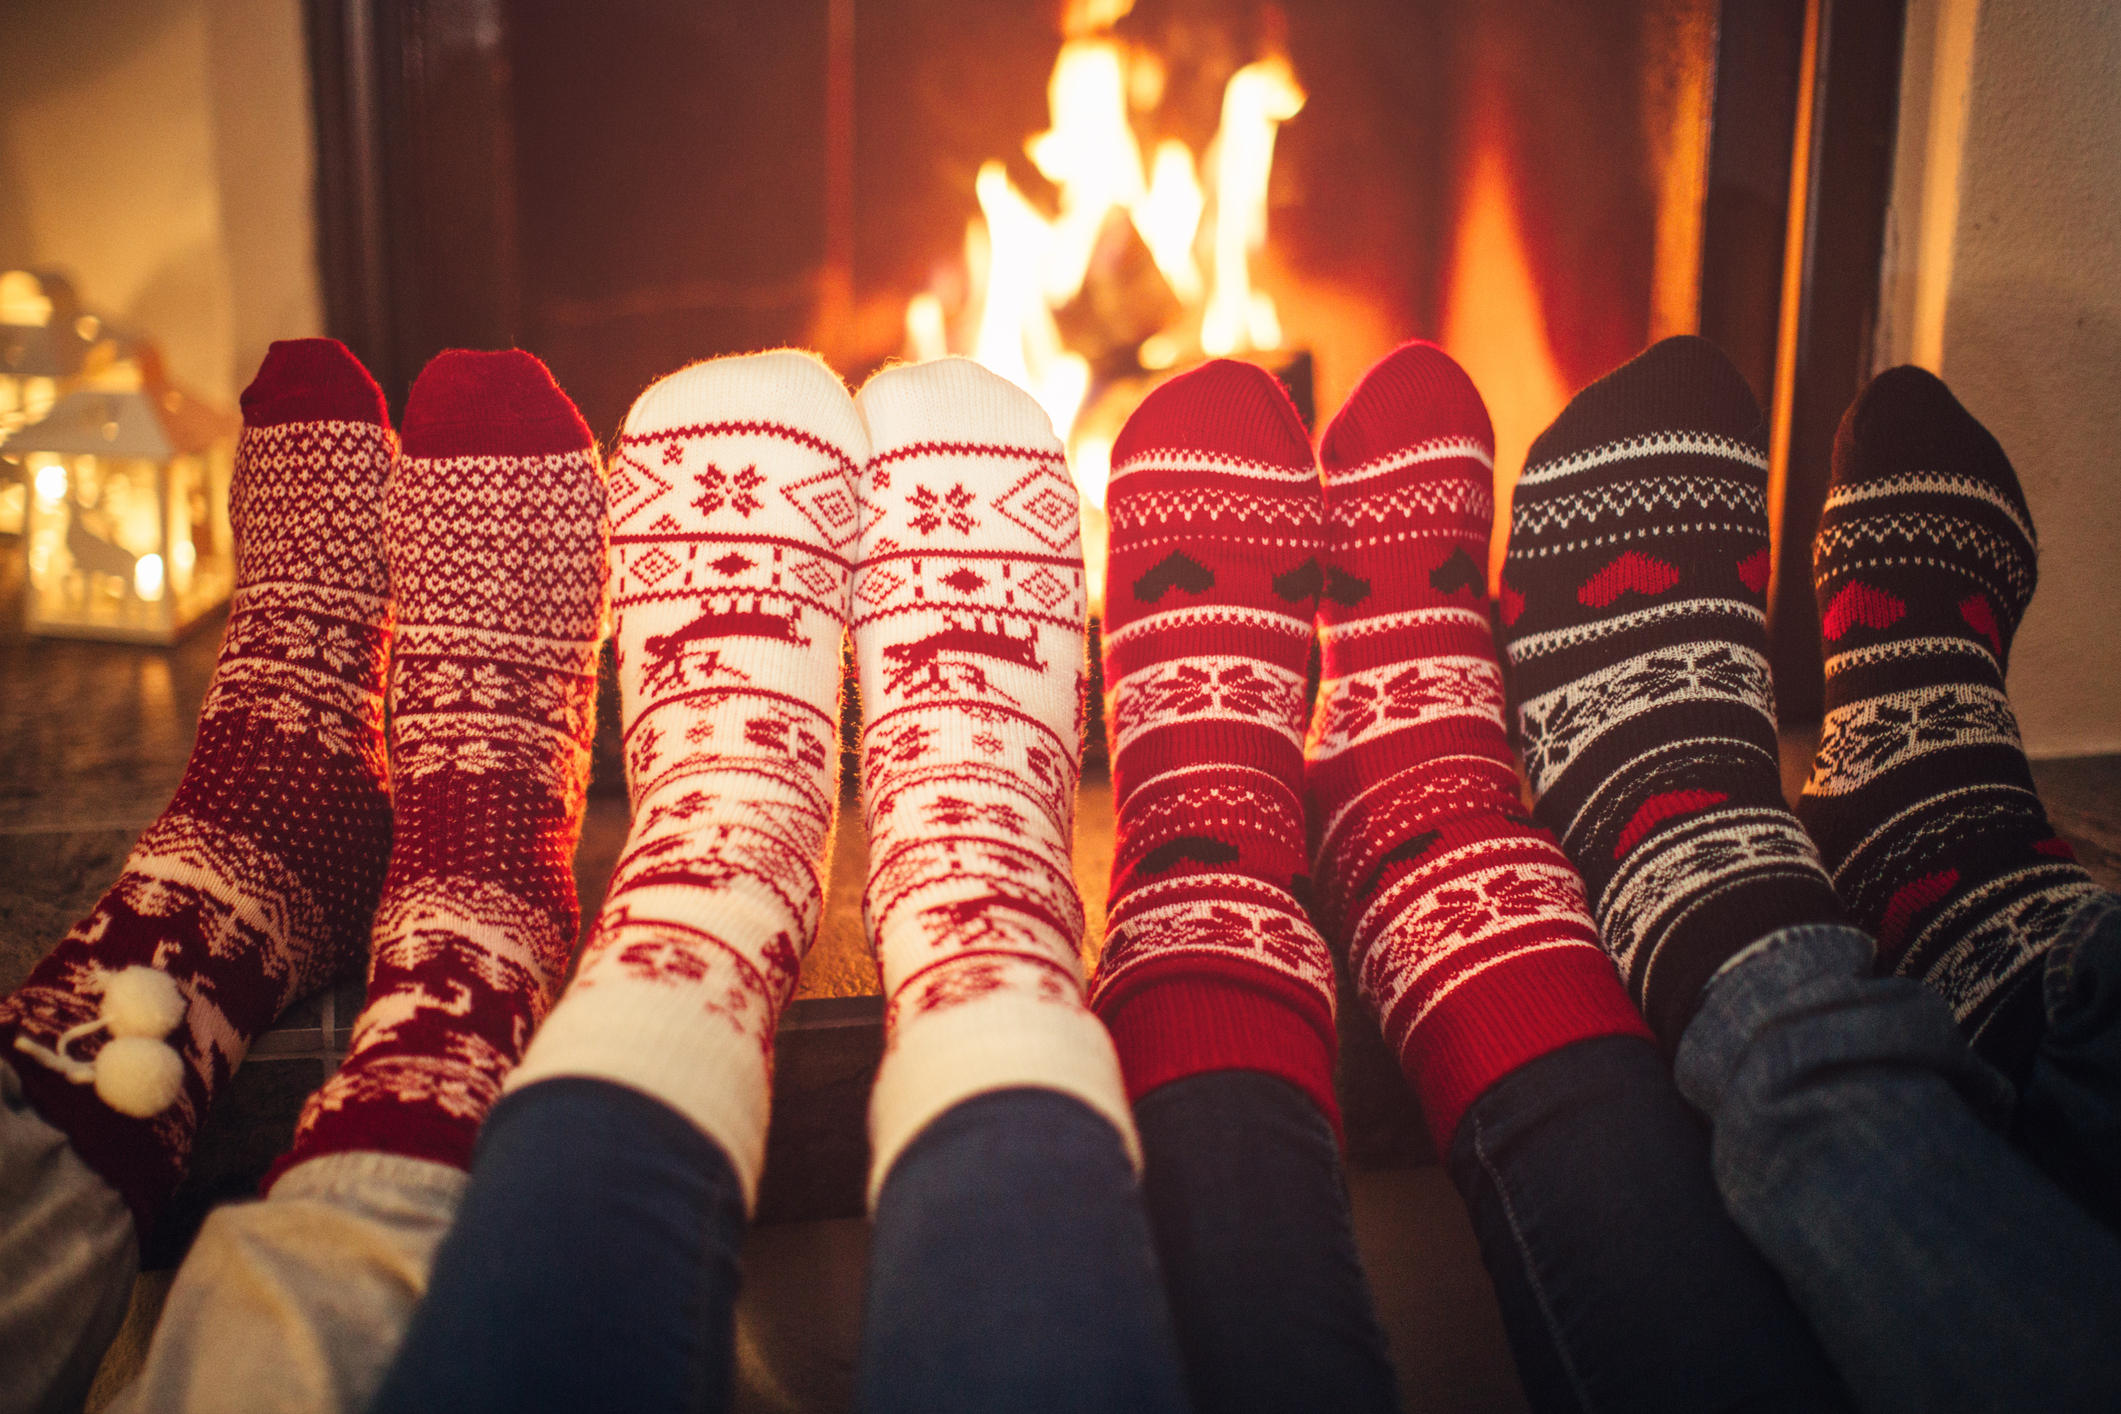 Feet lined up with Christmas socks on fireplace